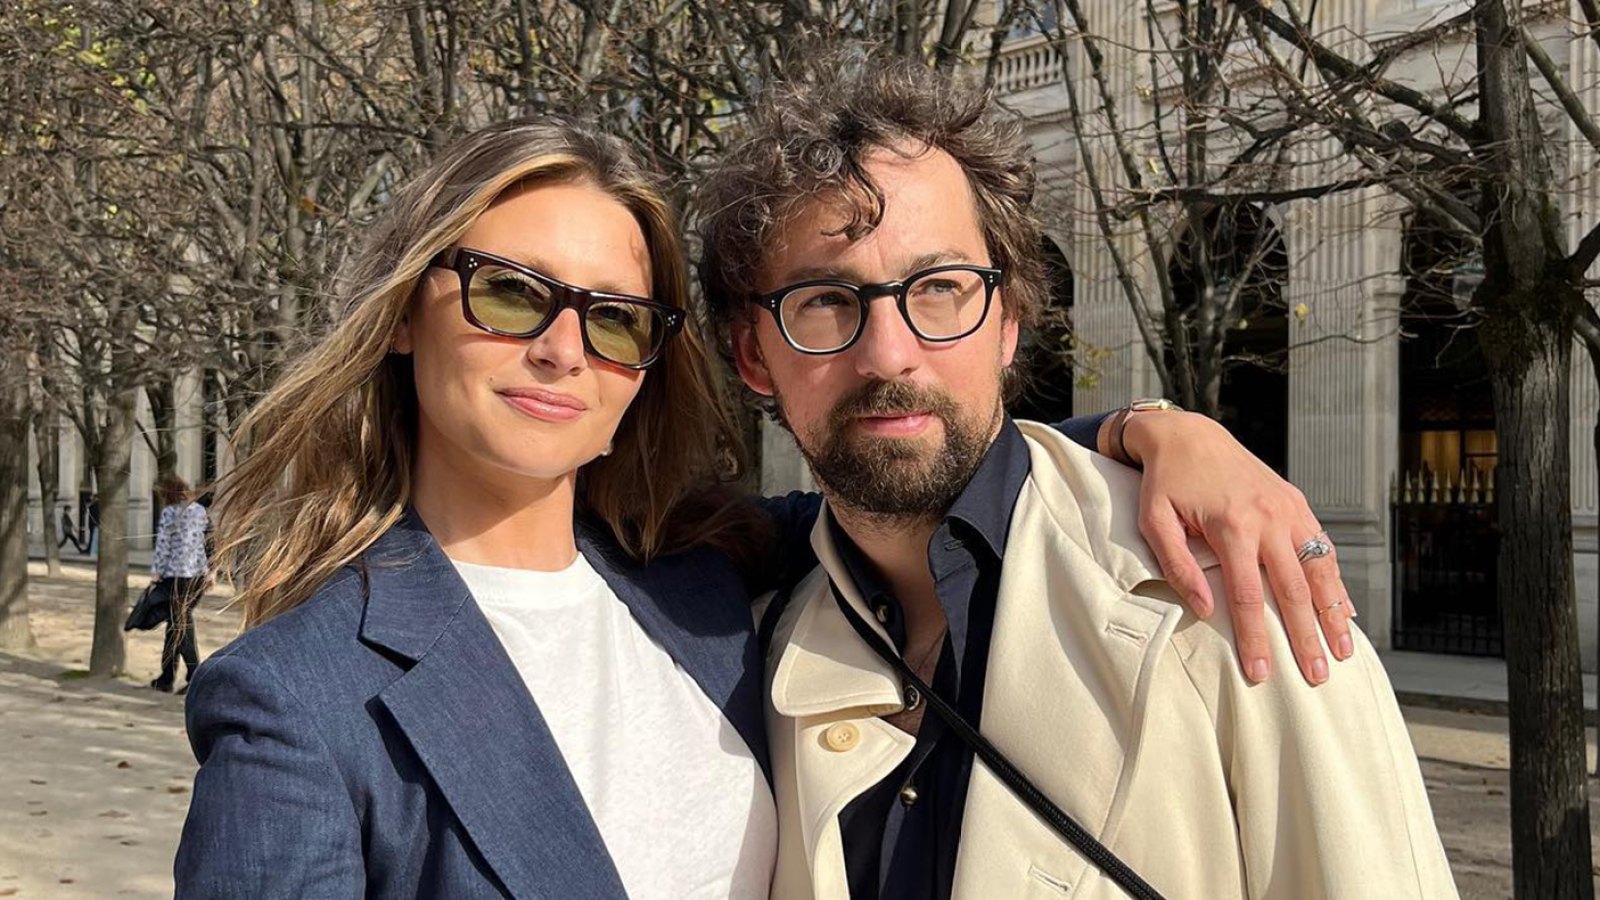 Aly Michalka Is Pregnant, Expecting 1st Baby With Husband Stephen Ringer